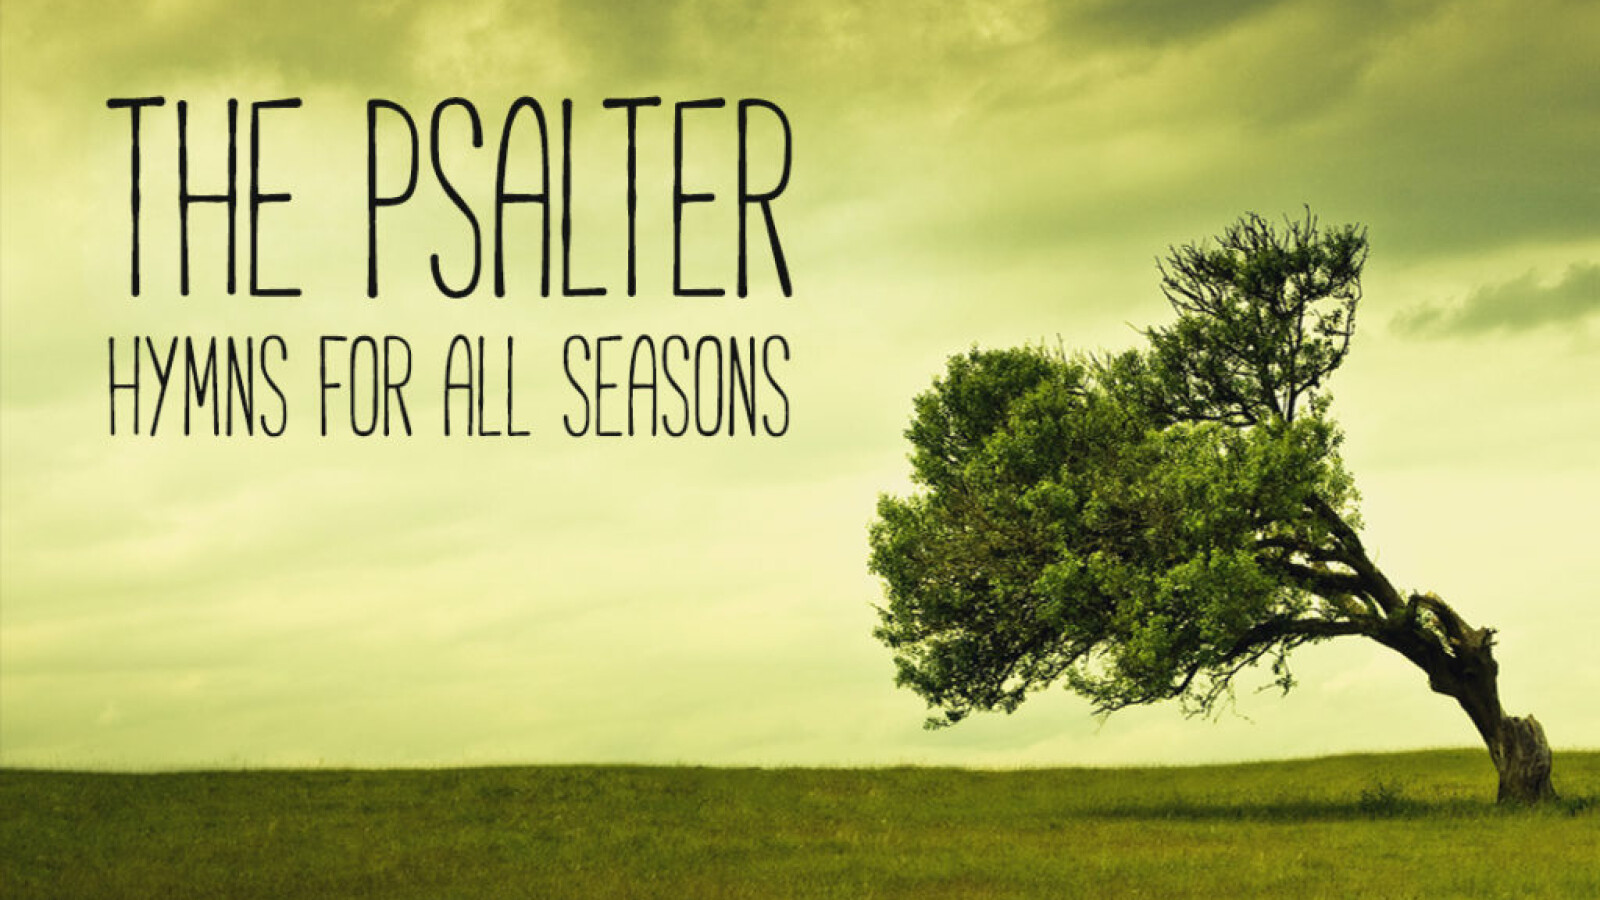 The Psalter: Hymns for All Seasons